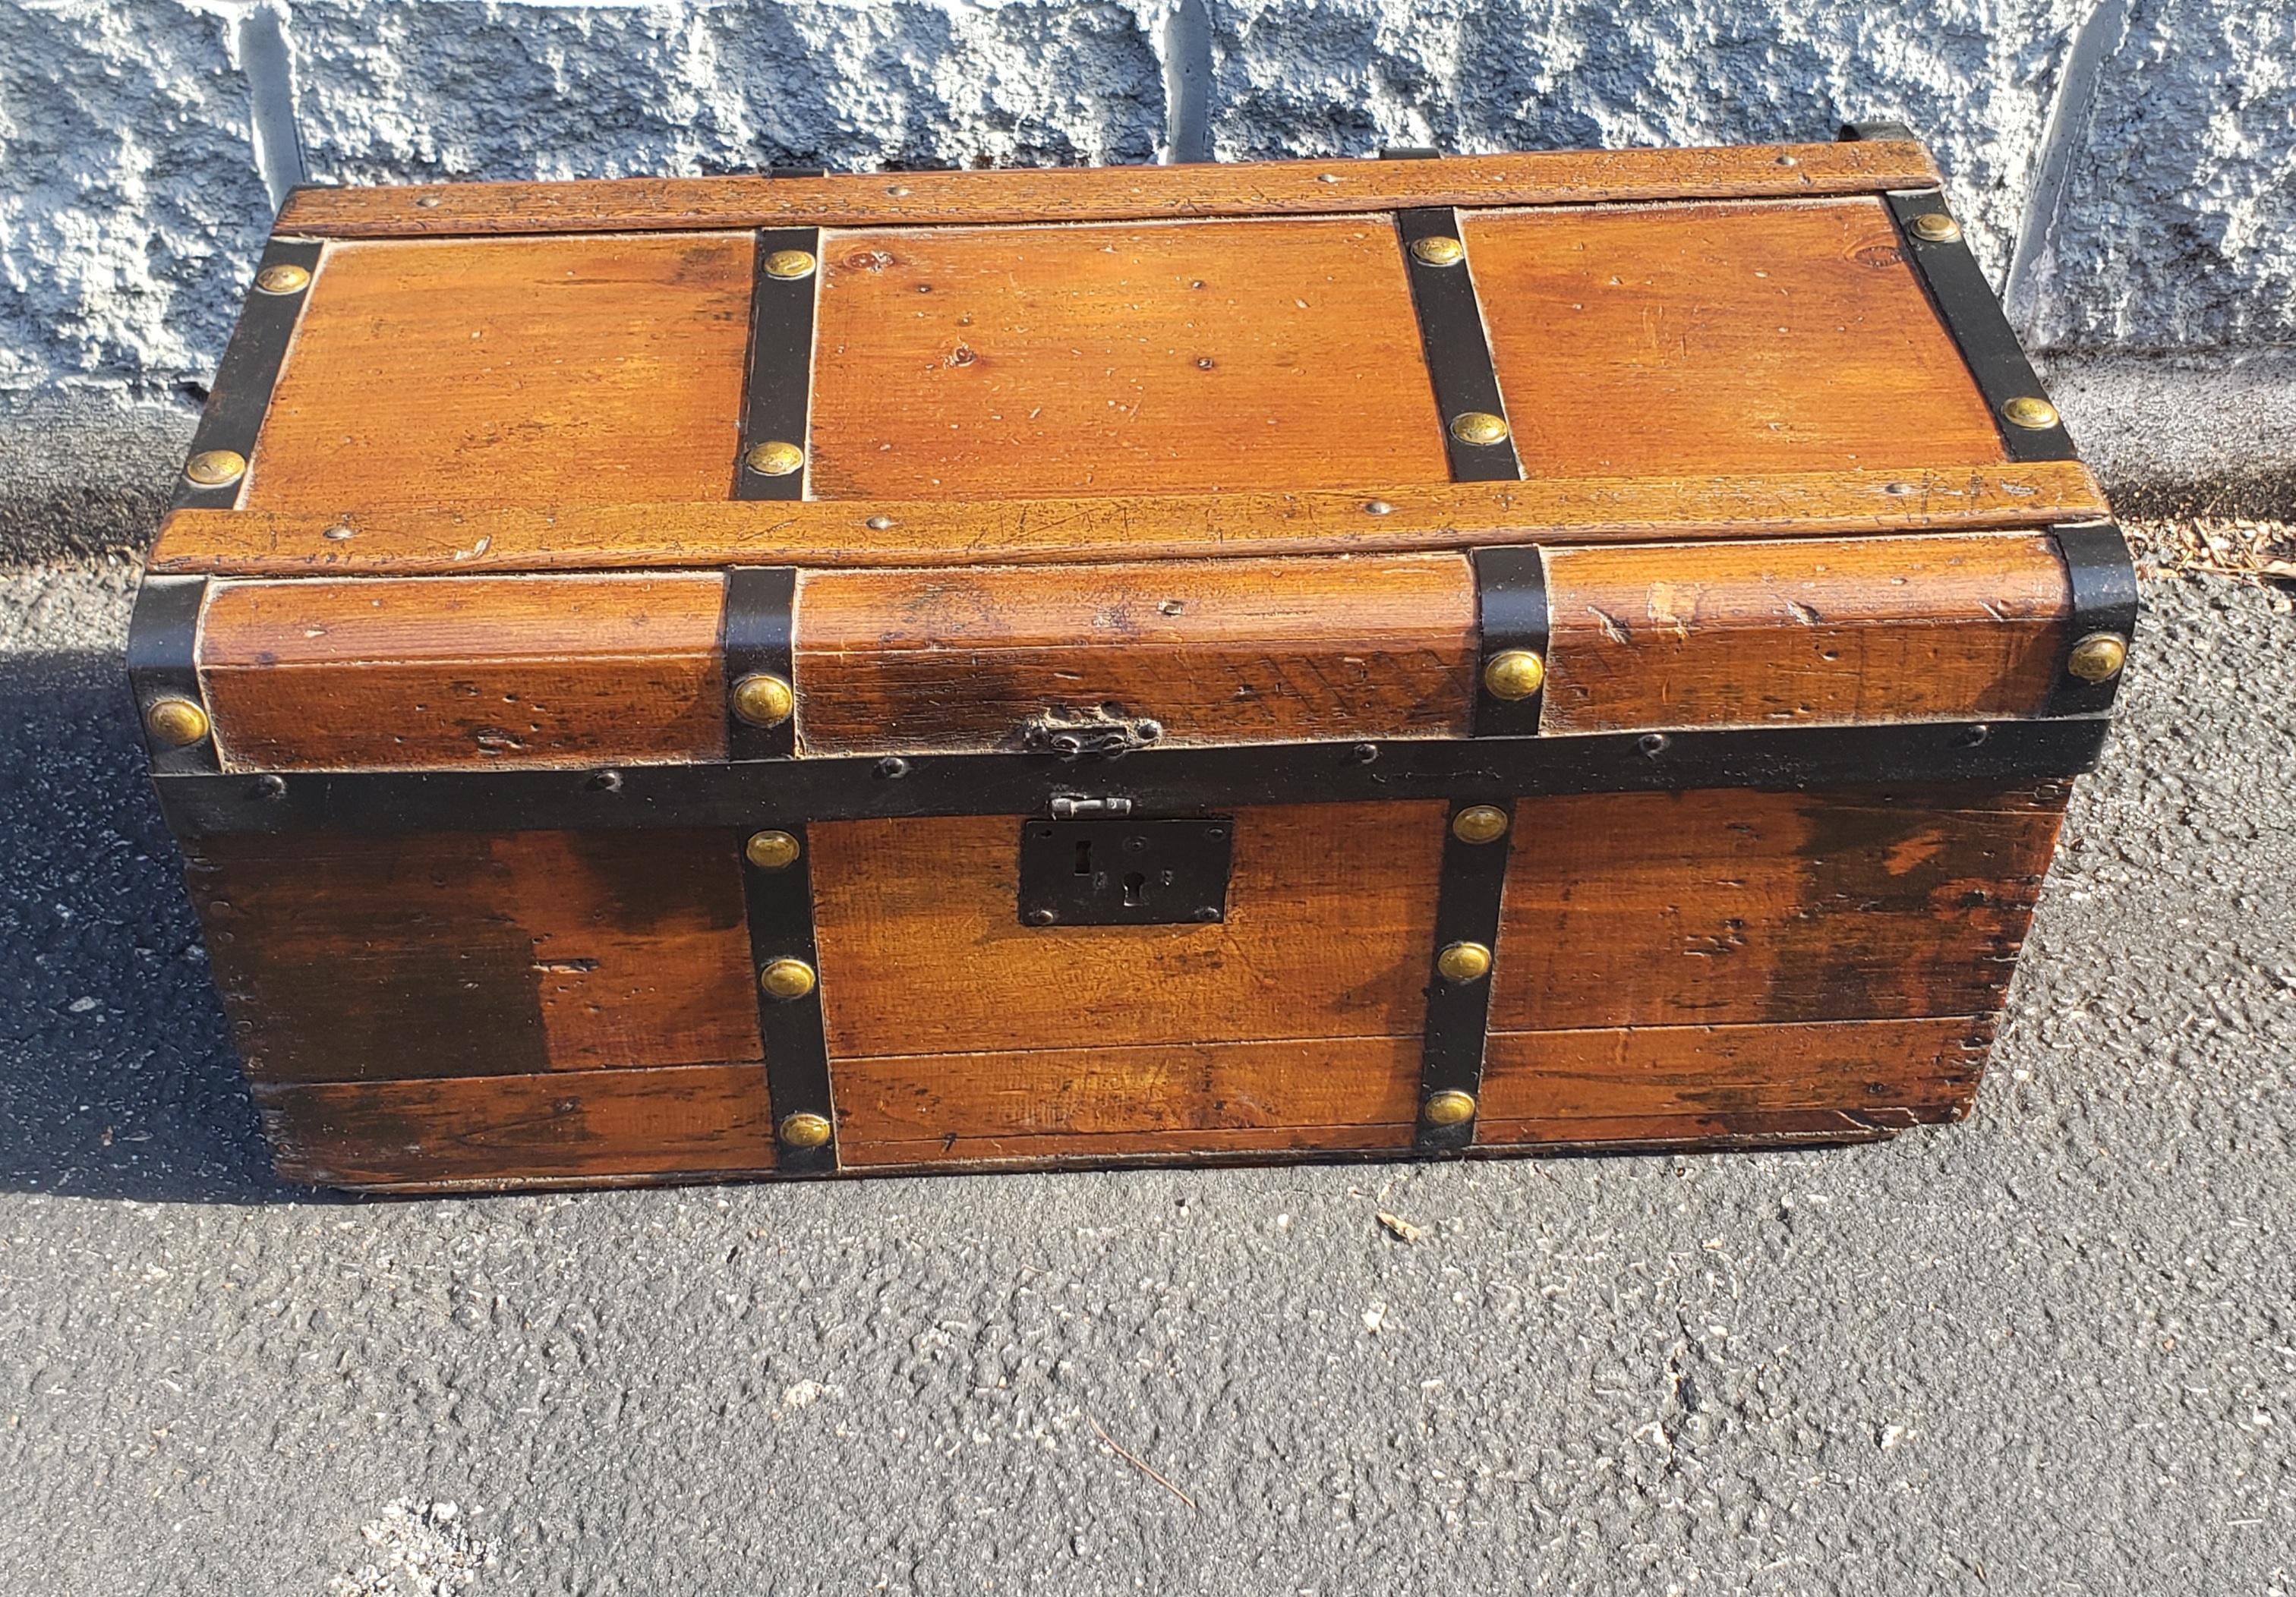 Eraly American pine, iron and brass map or utility chest with leather handles. Nice and rich patina. 
Lock not functional.